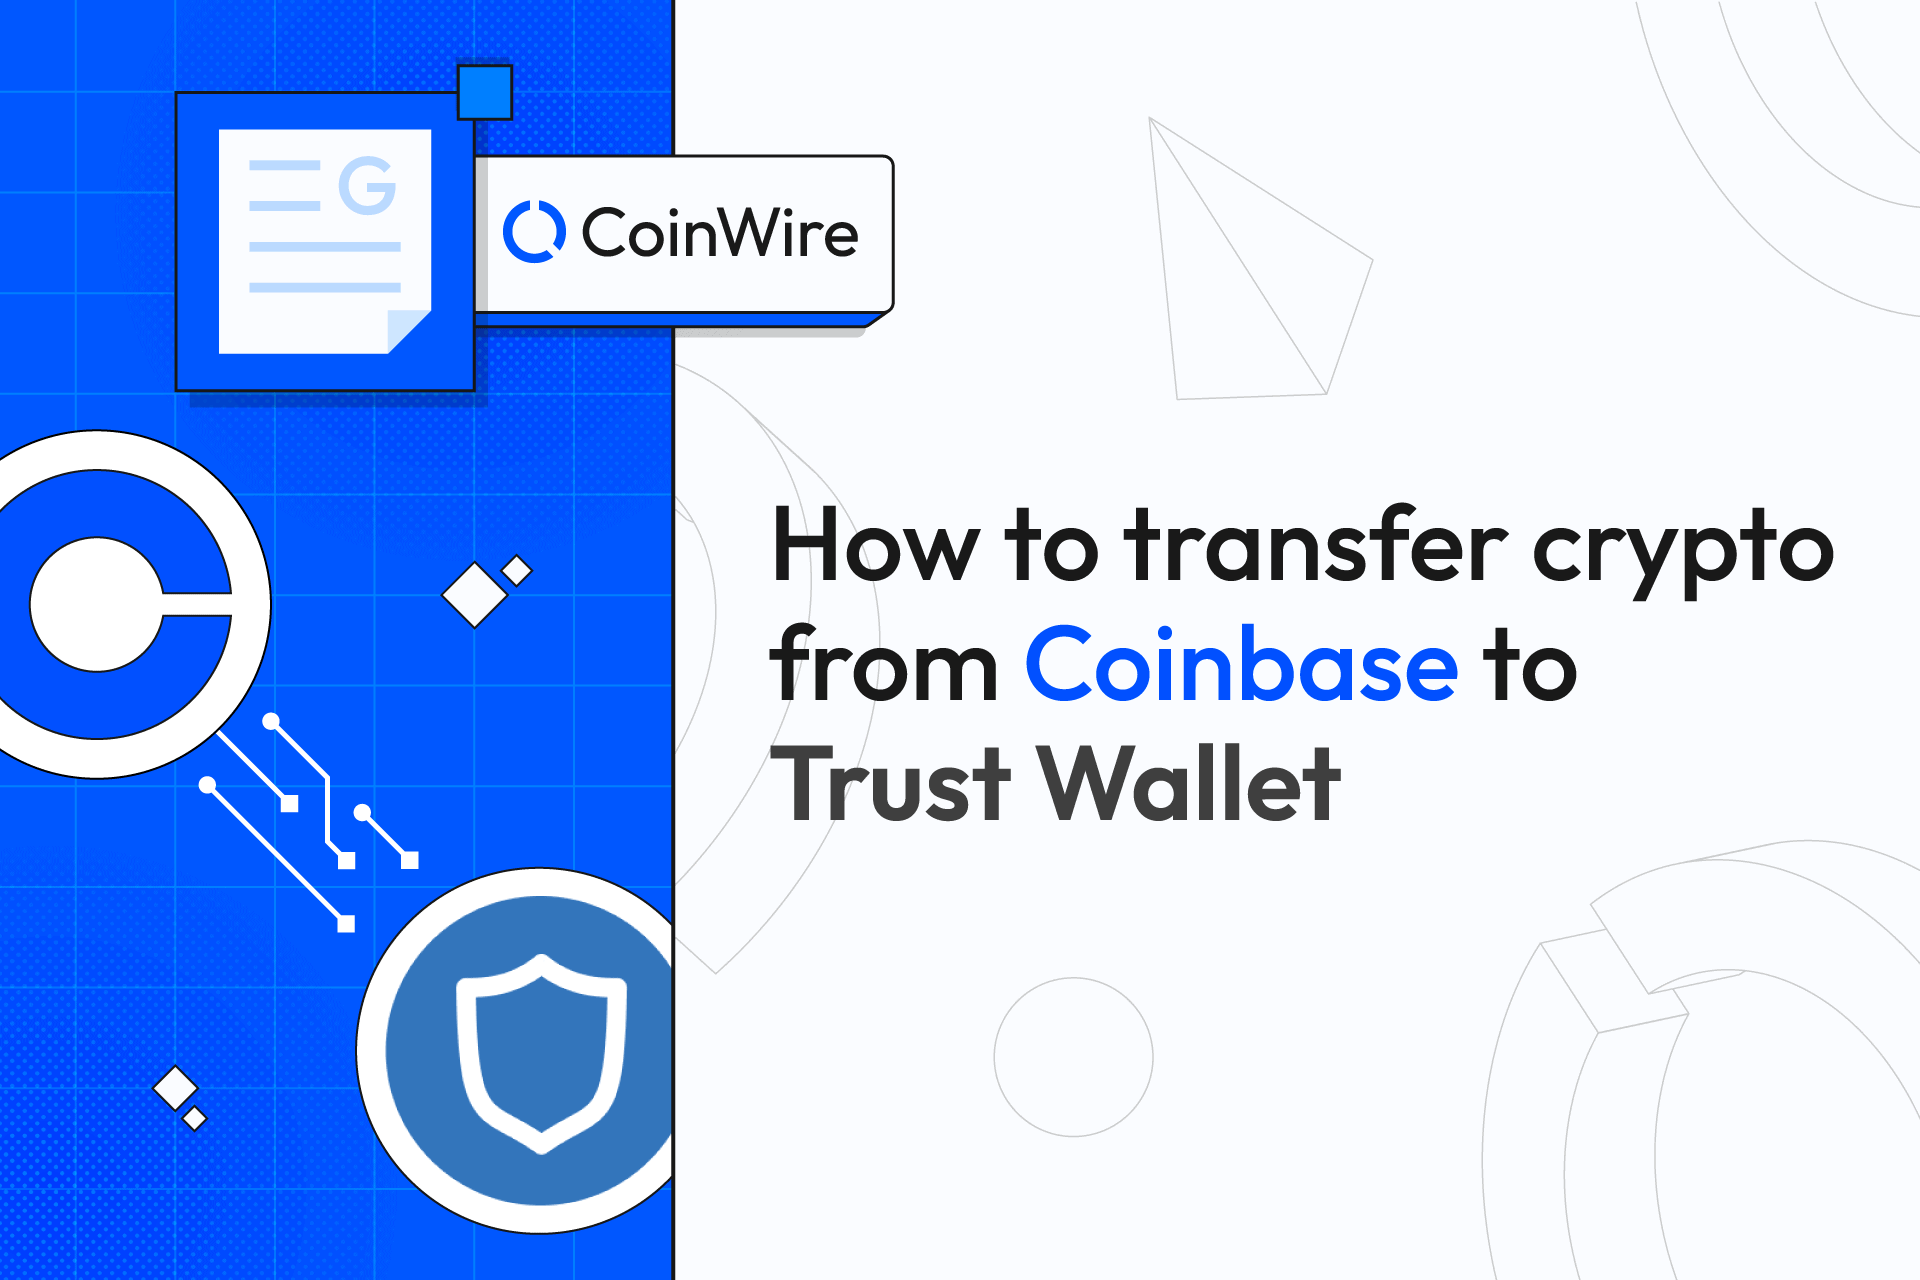 How To Transfer Crypto From Coinbase To Trust Wallet?